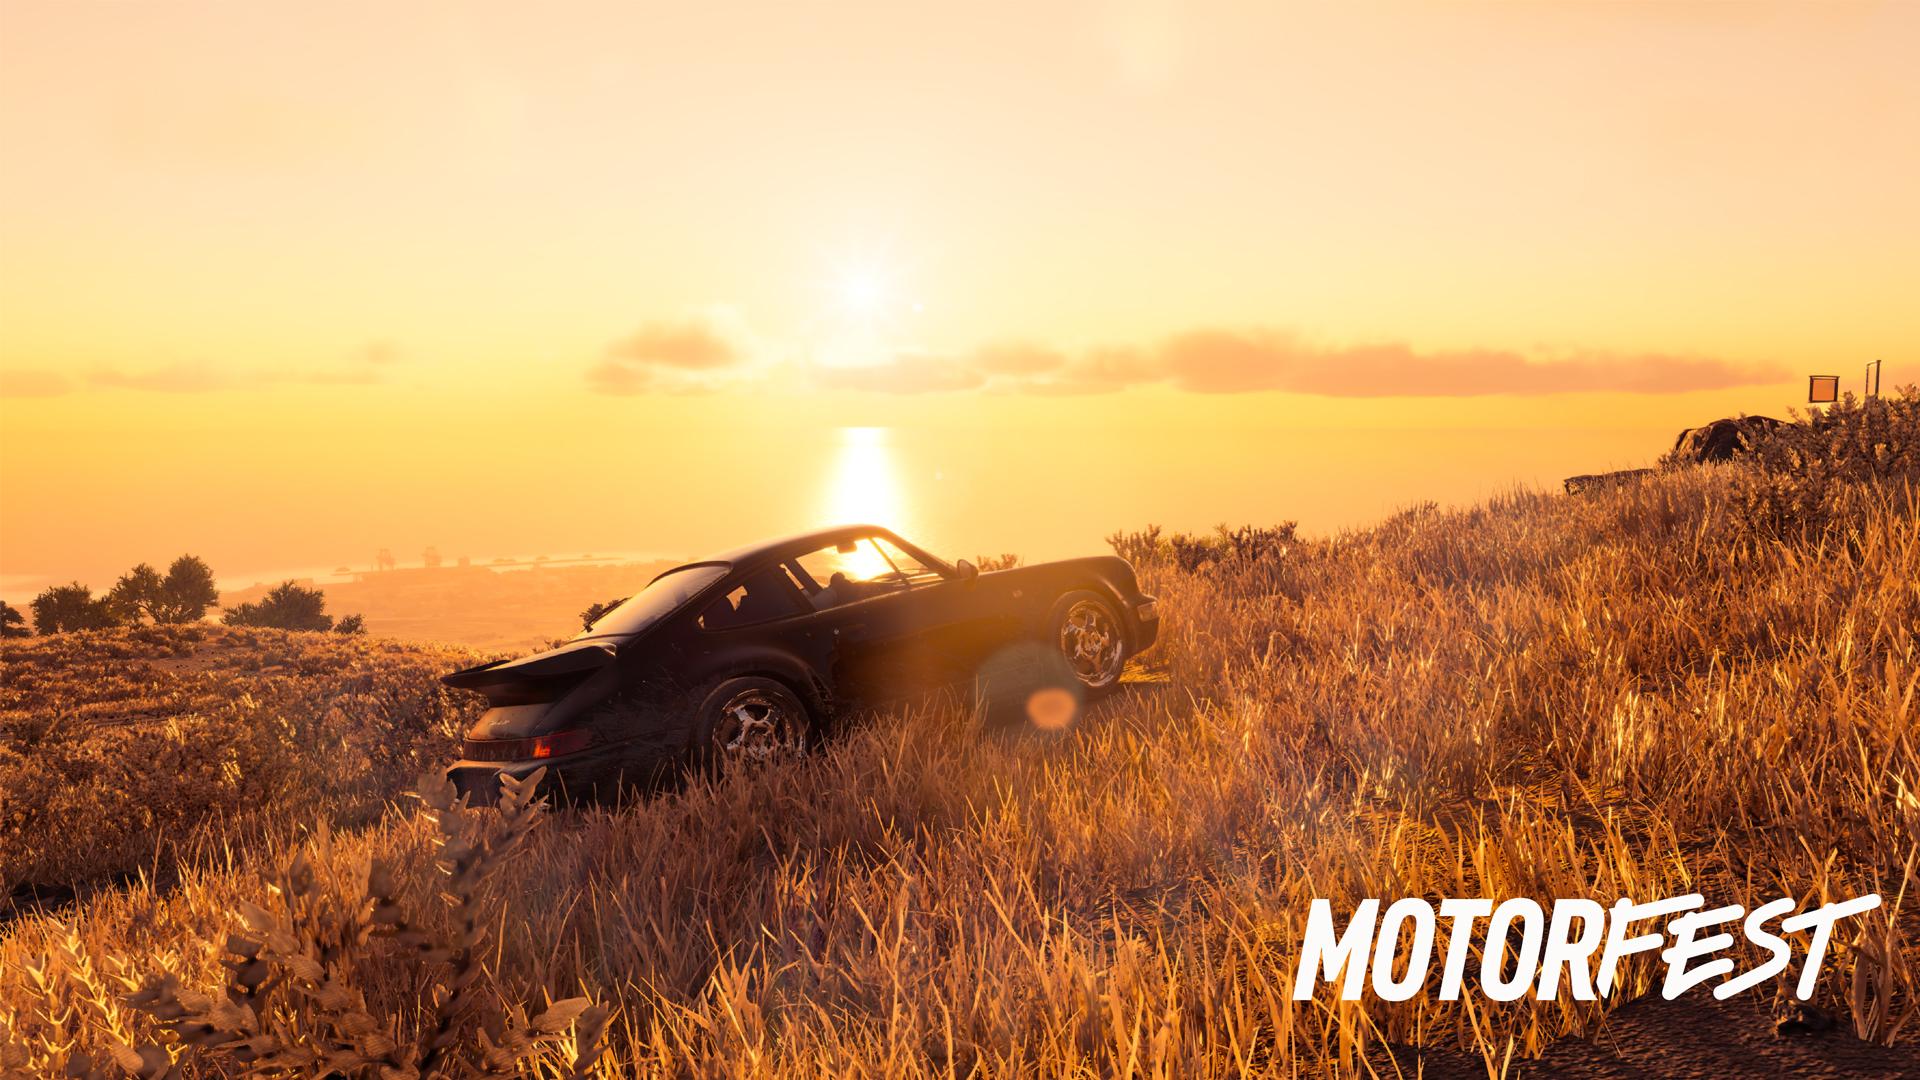 The Crew™ Motorfest Standard Edition  Download and Buy Today - Epic Games  Store